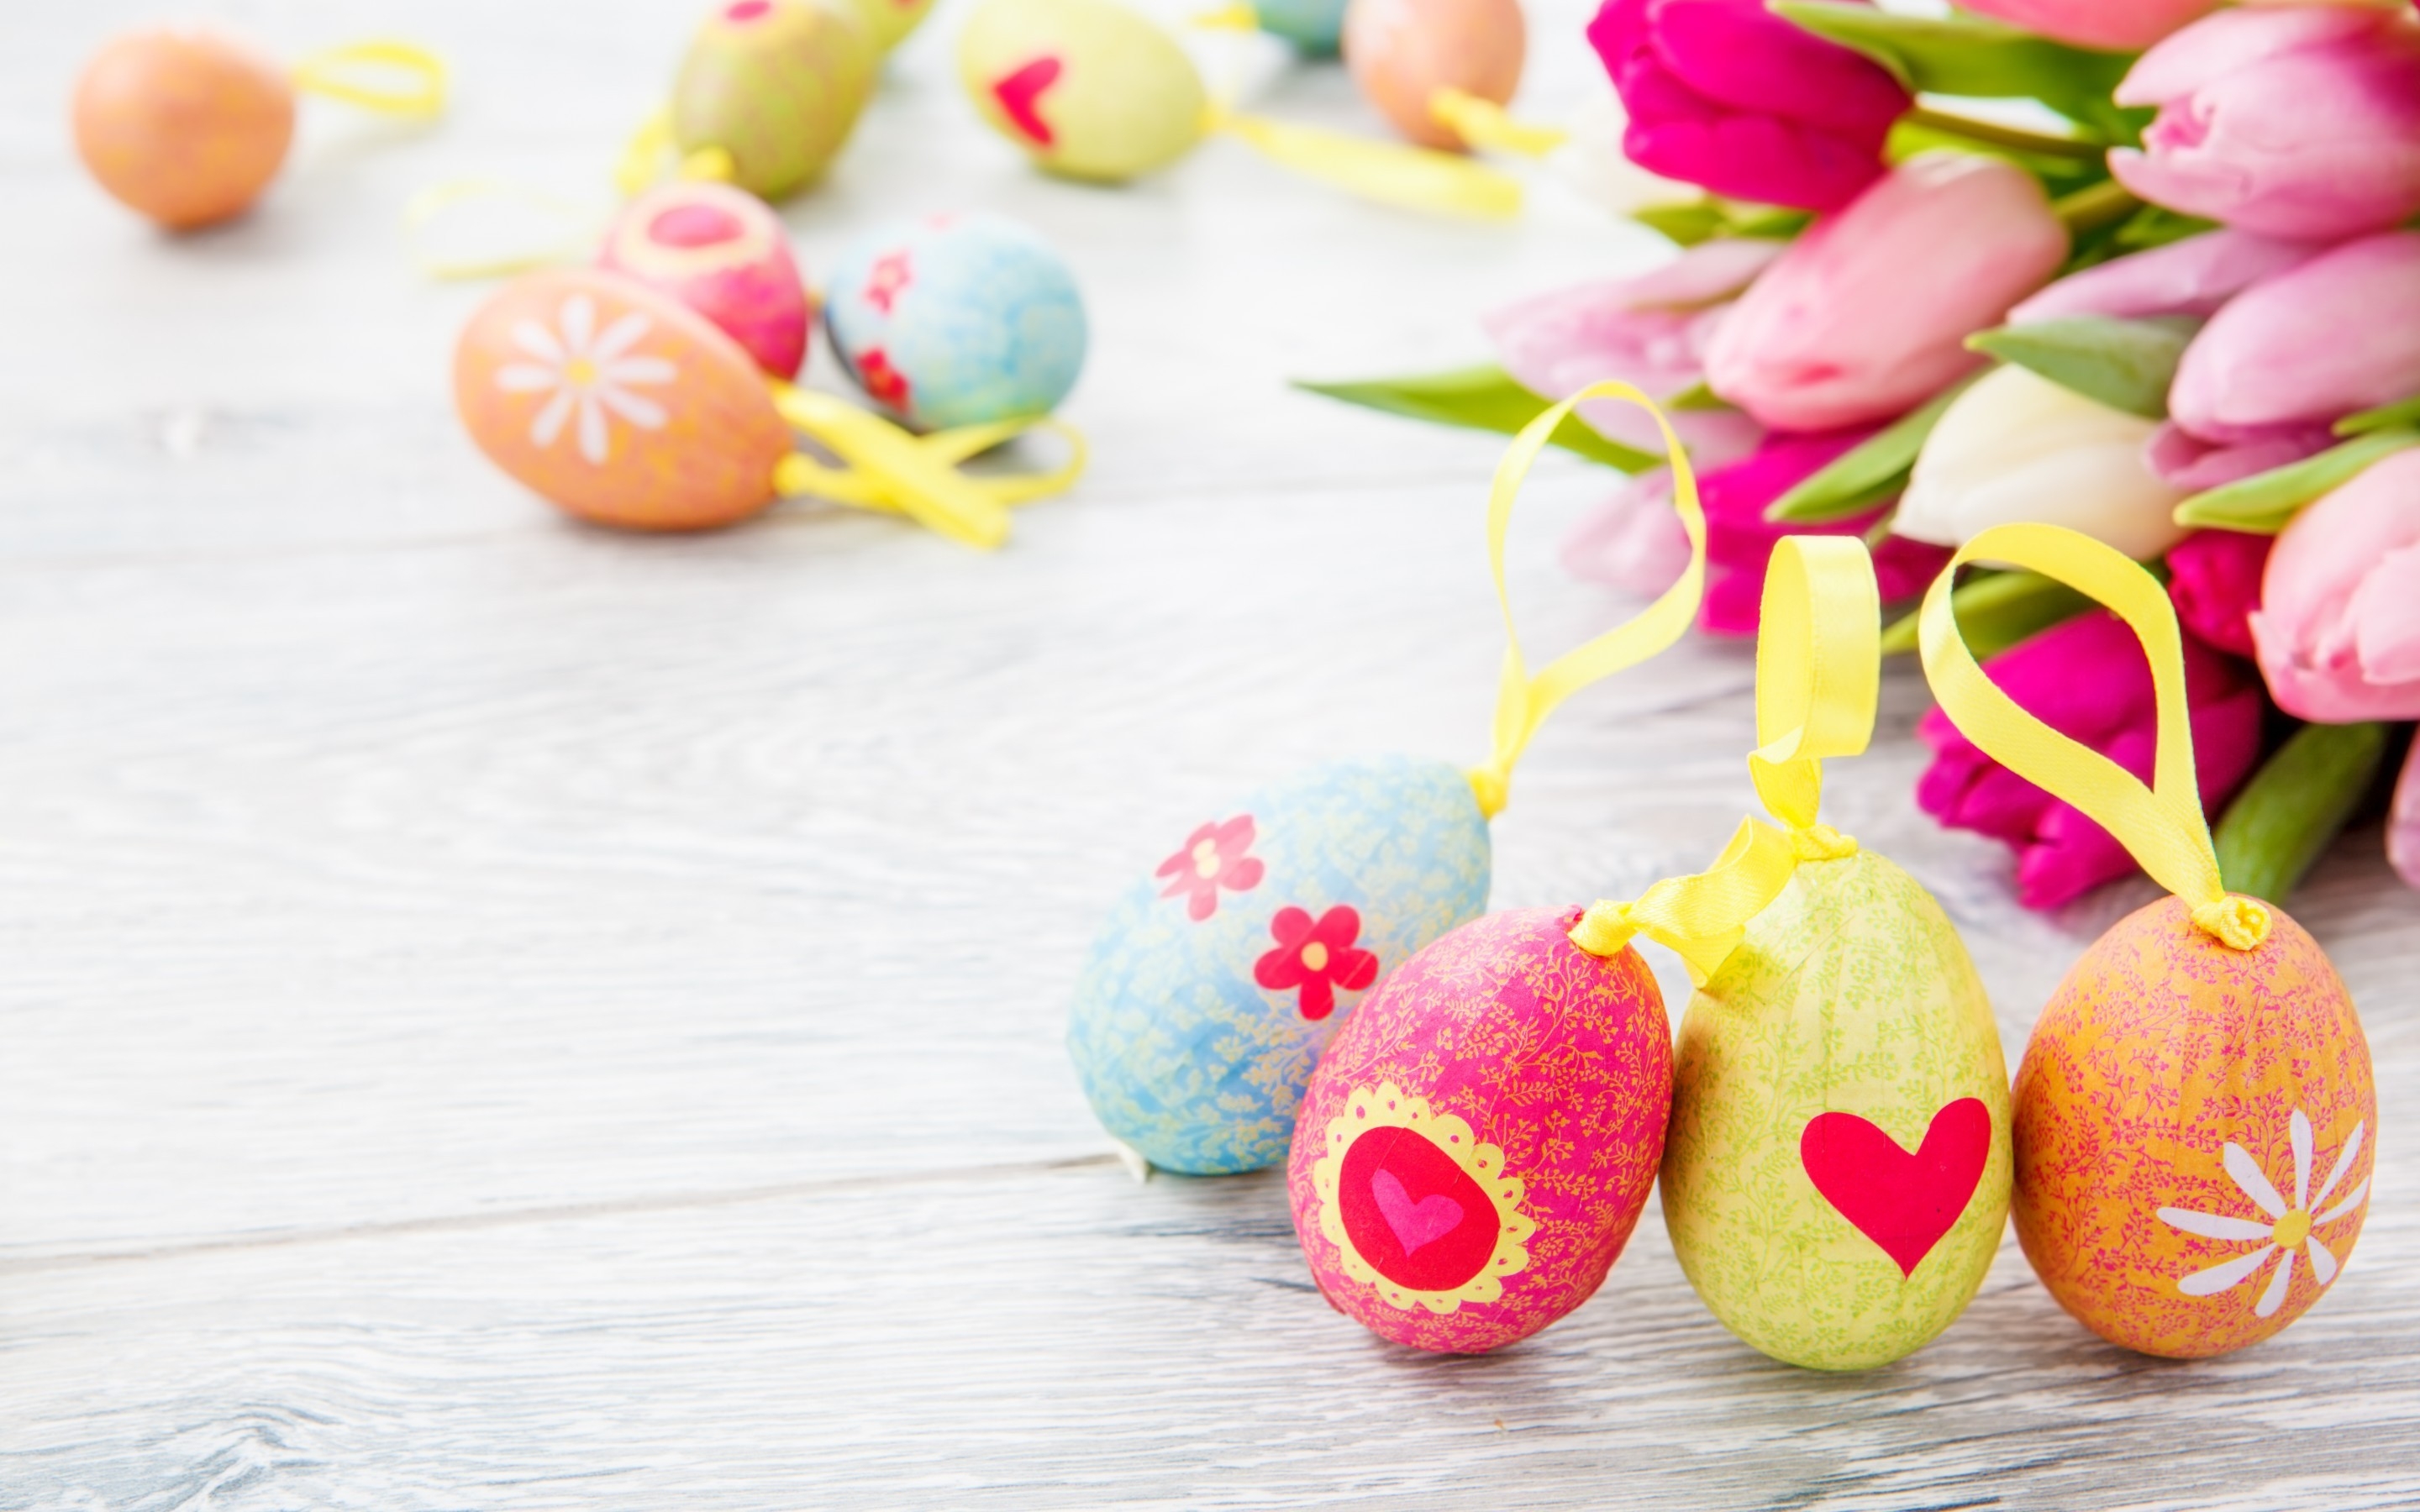 Decorative Easter Eggs for 2880 x 1800 Retina Display resolution